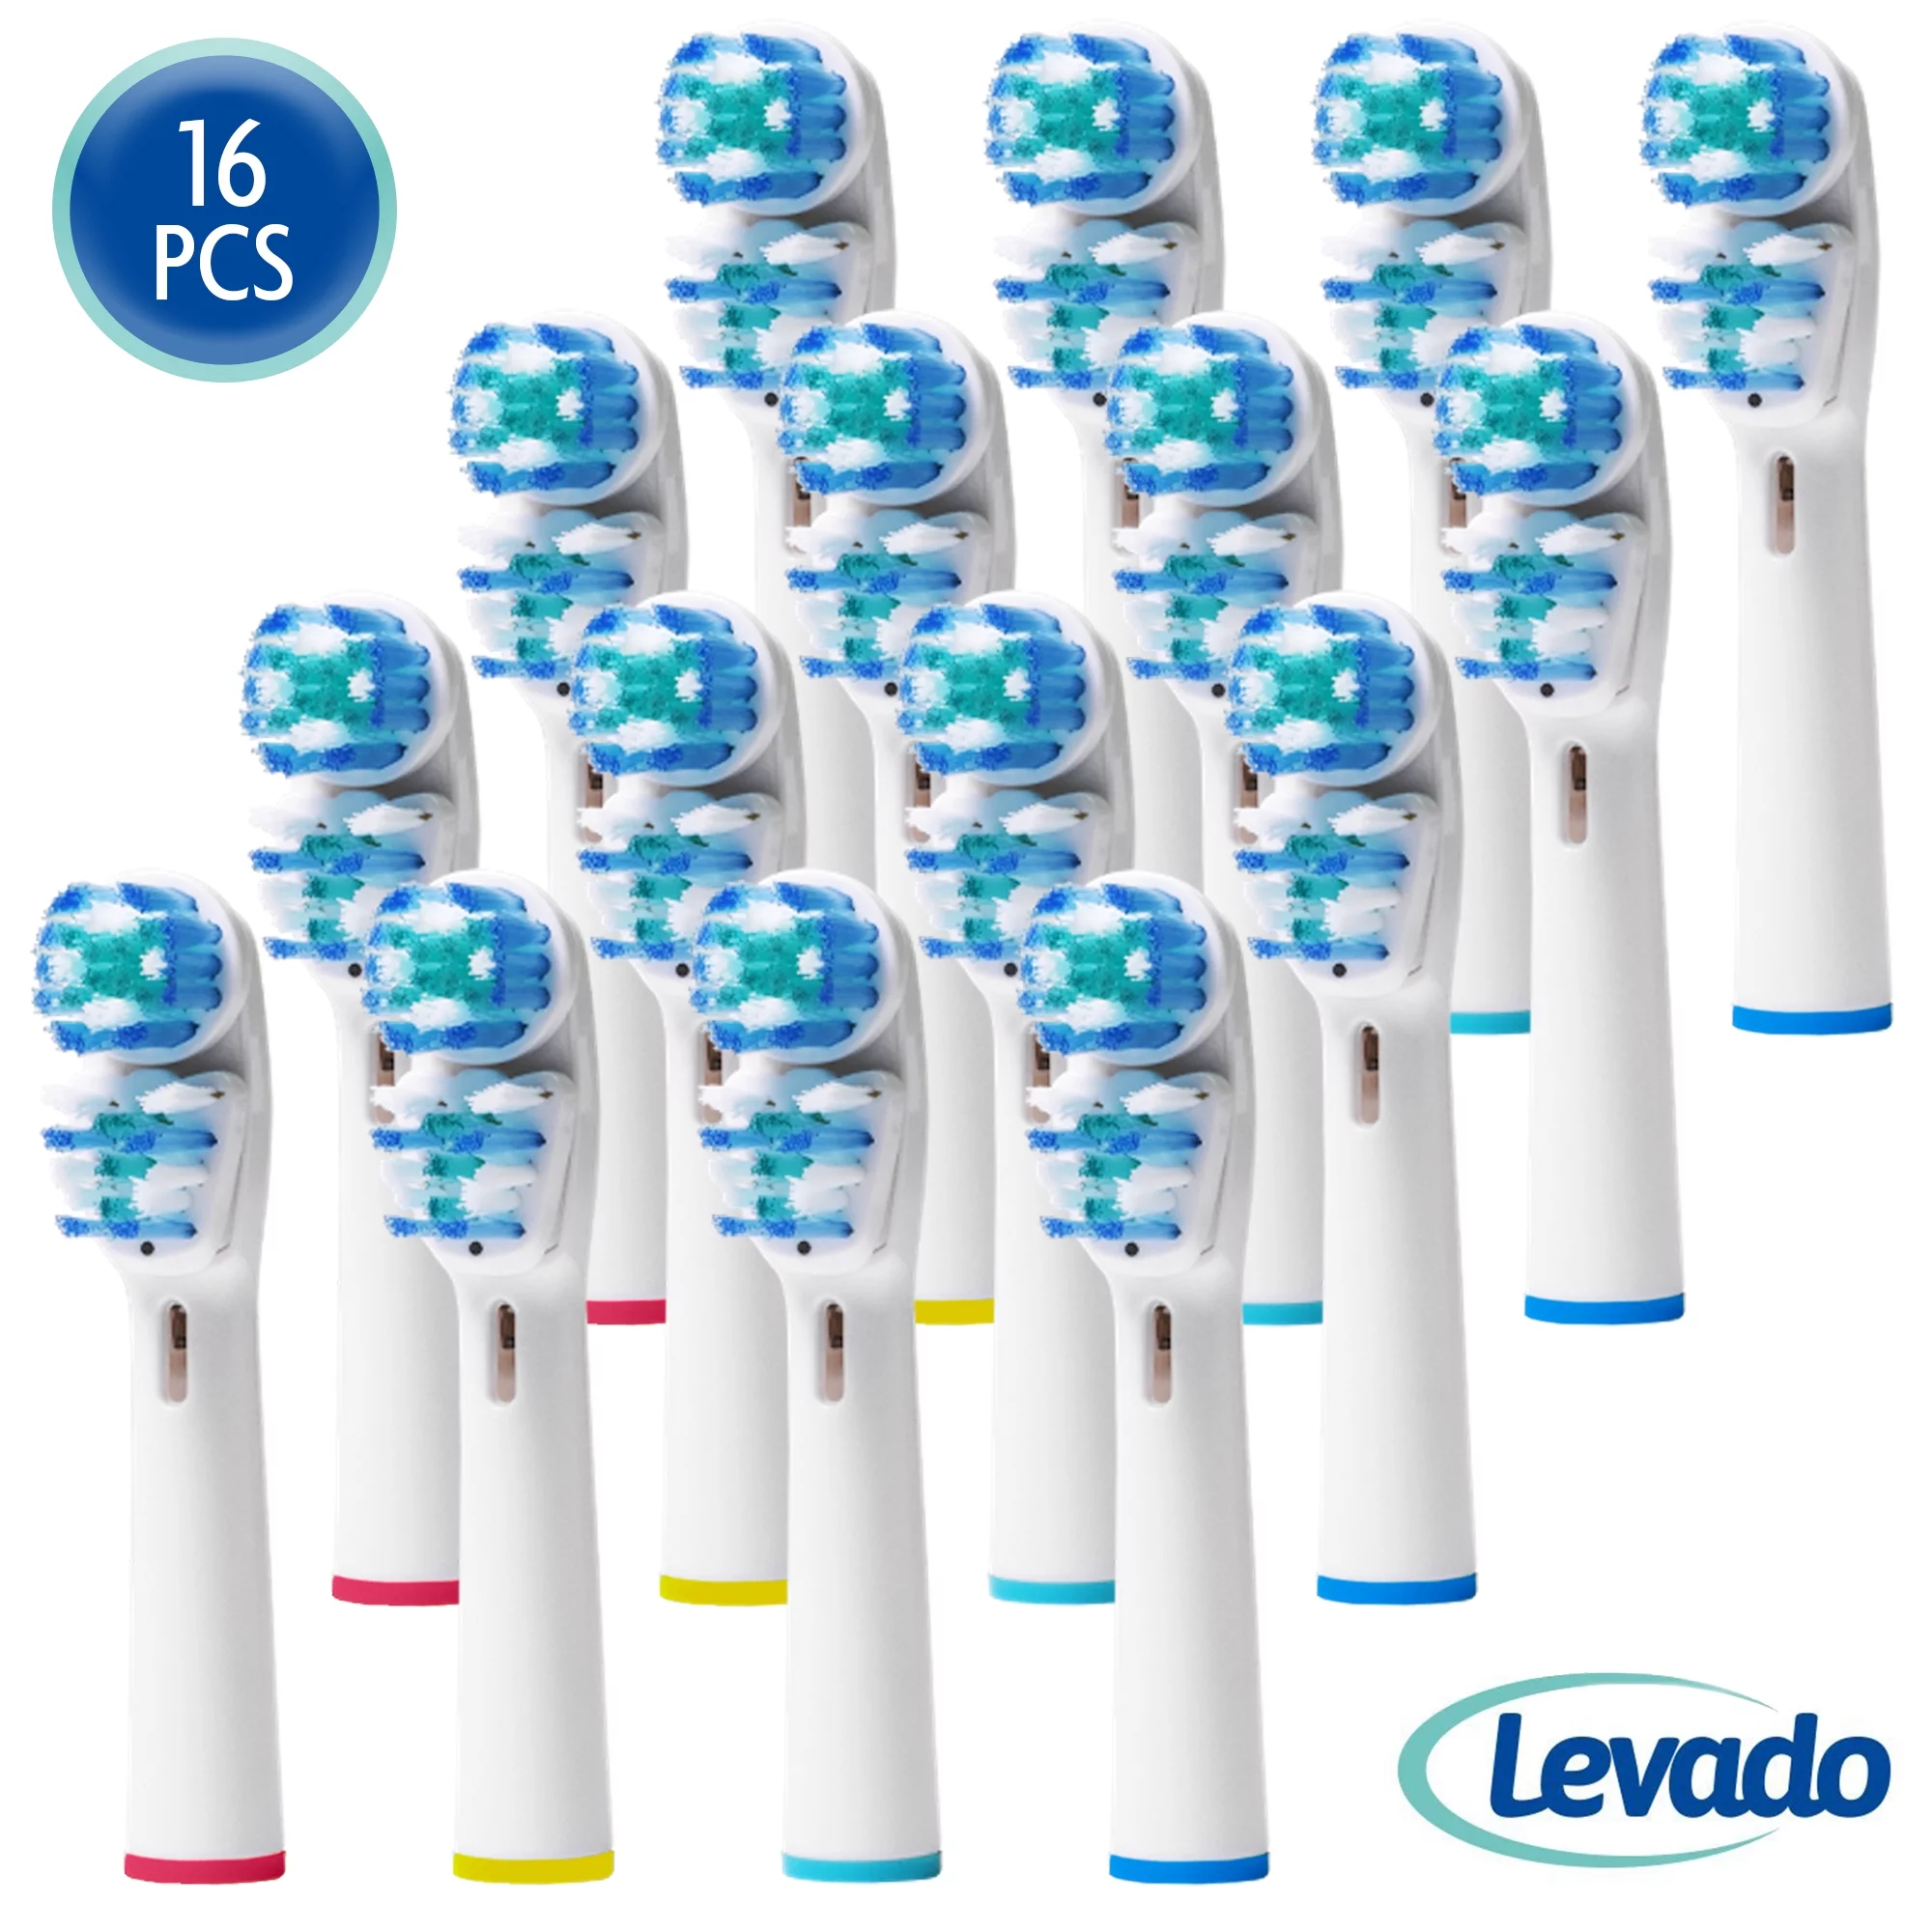 Replacement Brush Heads Compatible with OralB Braun- Best Double Clean, Pack of 16 Electric Toothbrush Replacement Heads- for Oral B Pro, 1000, 8000, 9000, Sonic, Adults, Kids, Vitality, Dual Plus!